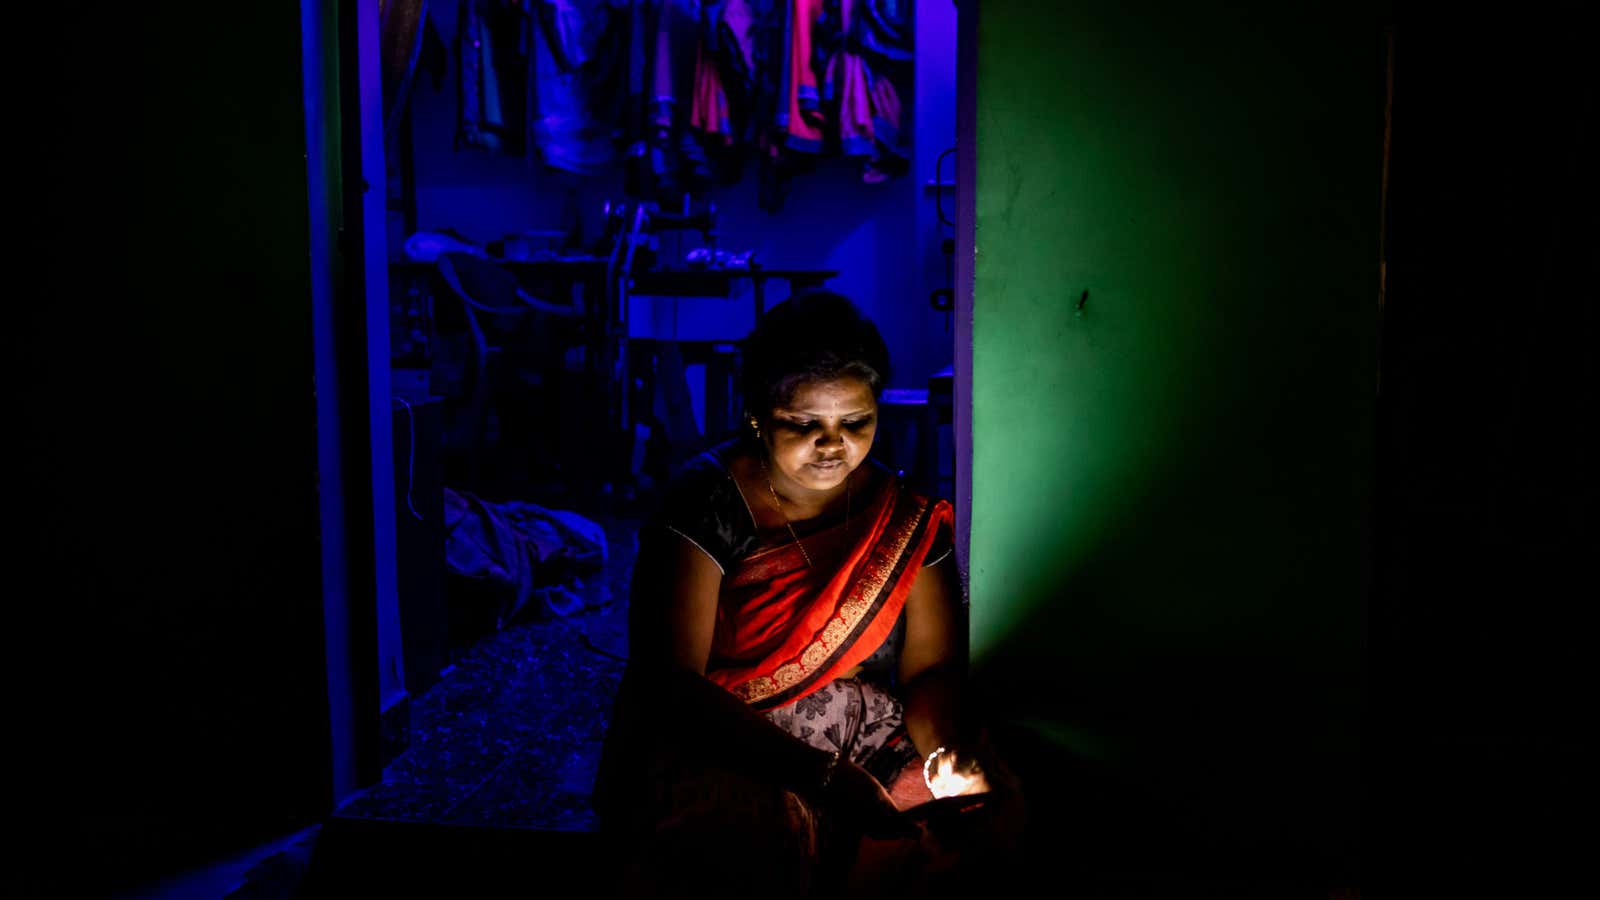 Sweety Devangan, a 42-year-old tailor, checks her phone during a power outage near a coal power plant in Korba, Chhattisgarh.